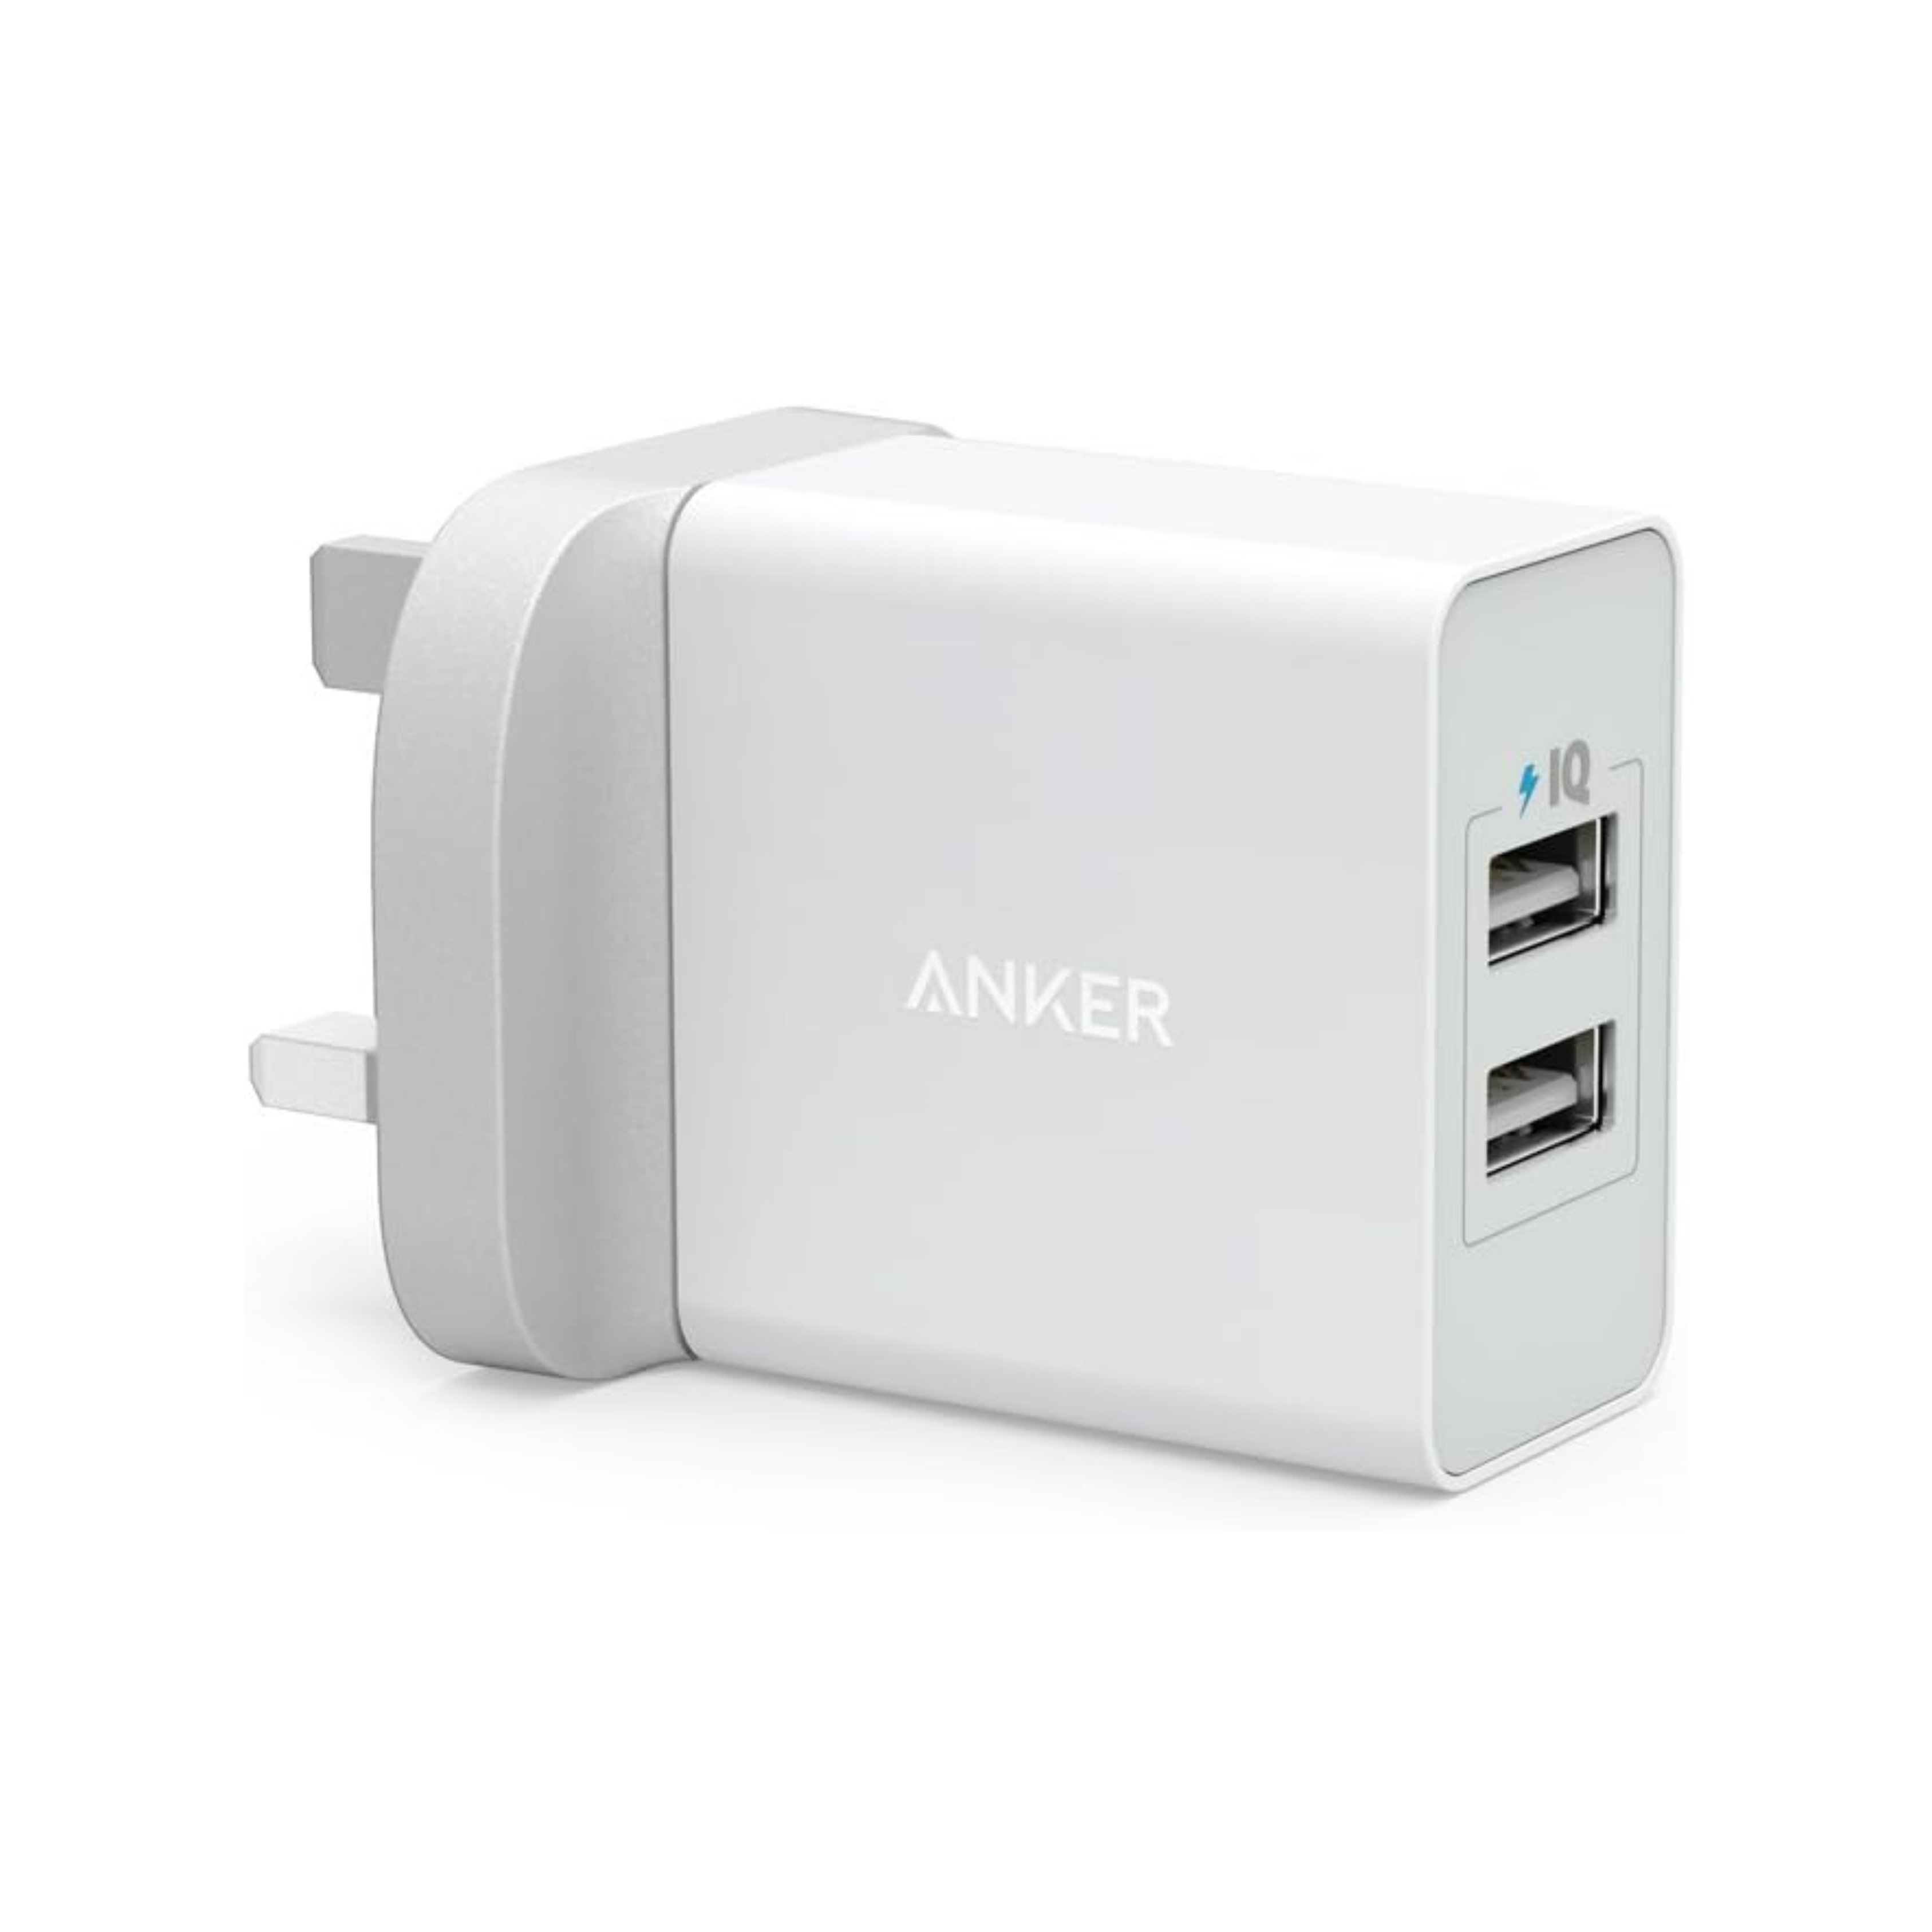 Anker 24W 2-Port USB Powerline Plus, Wall Charger for Mobile Phones, White, 3ft, A2021K21